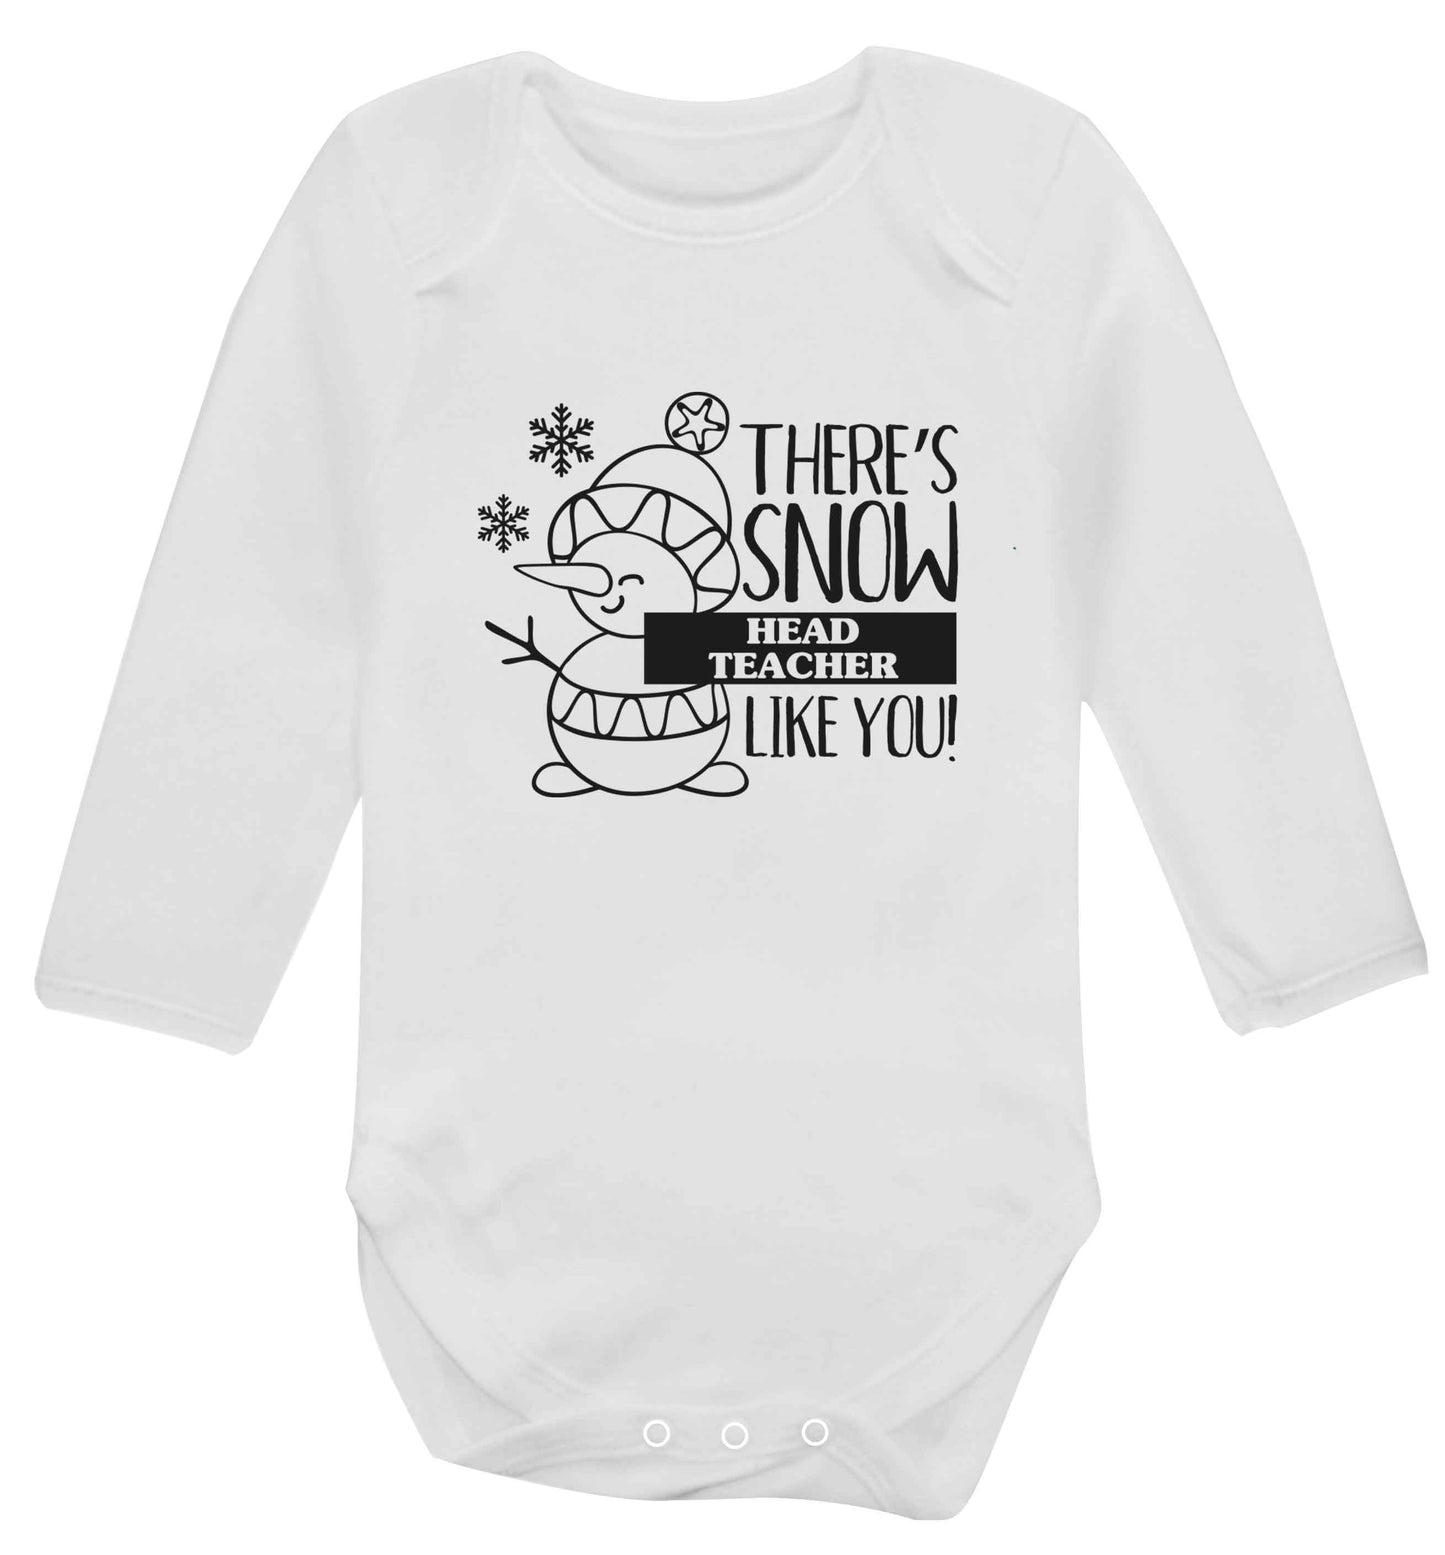 There's snow head teacher like you baby vest long sleeved white 6-12 months